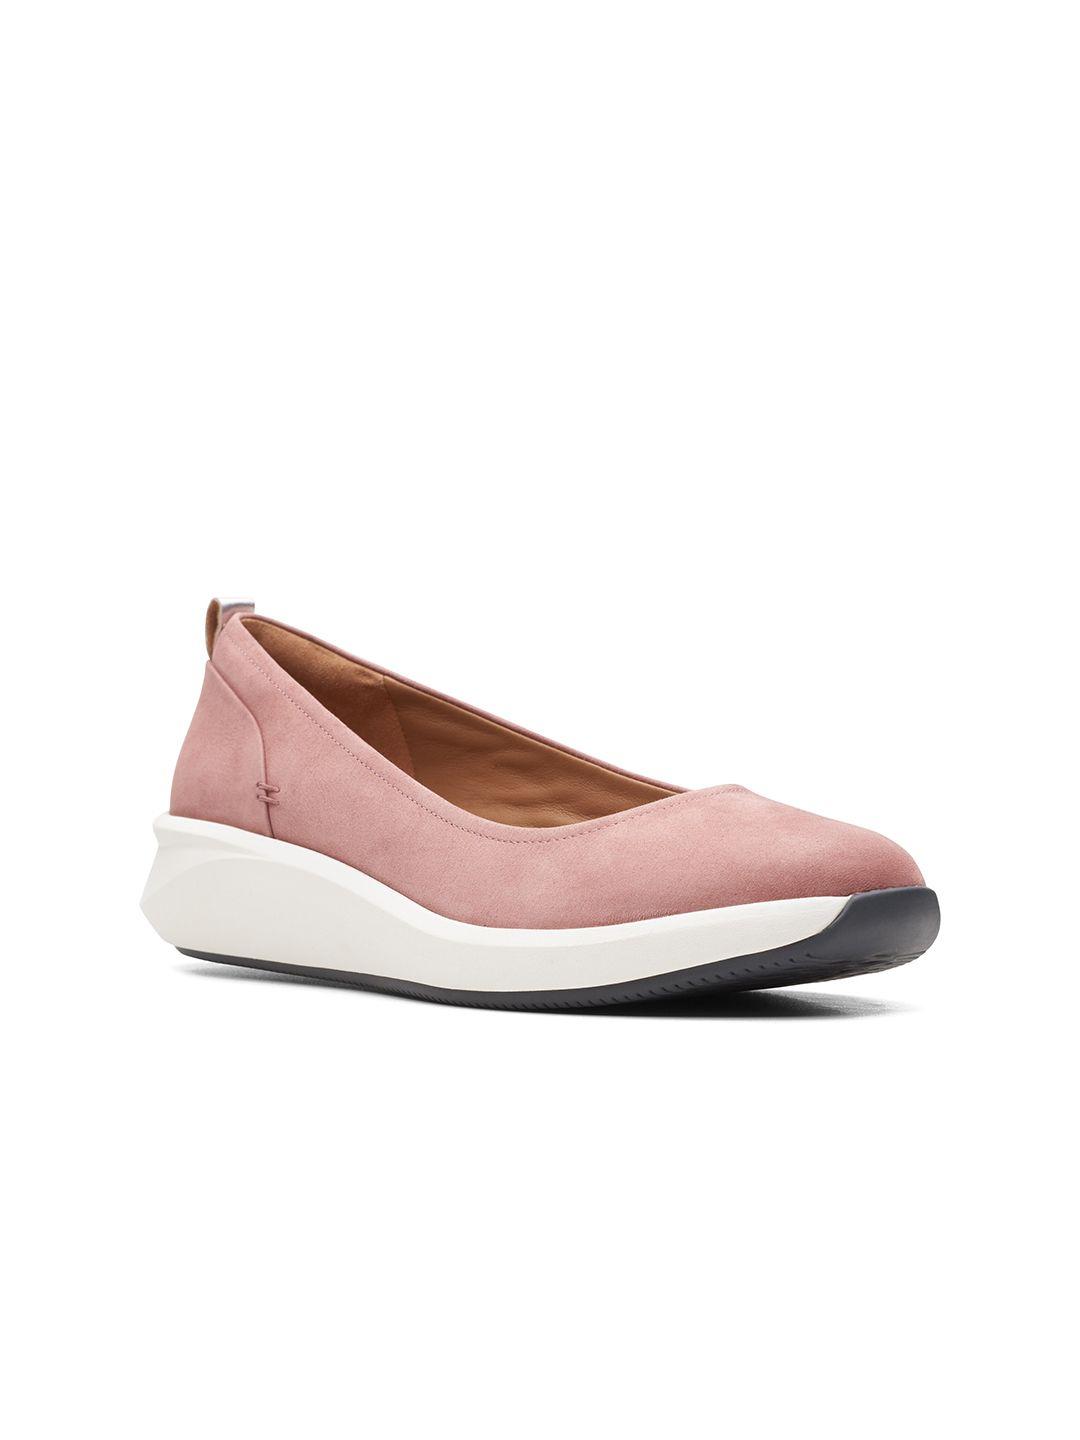 clarks-women-un-rio-vibe-rose-leather-running-shoes